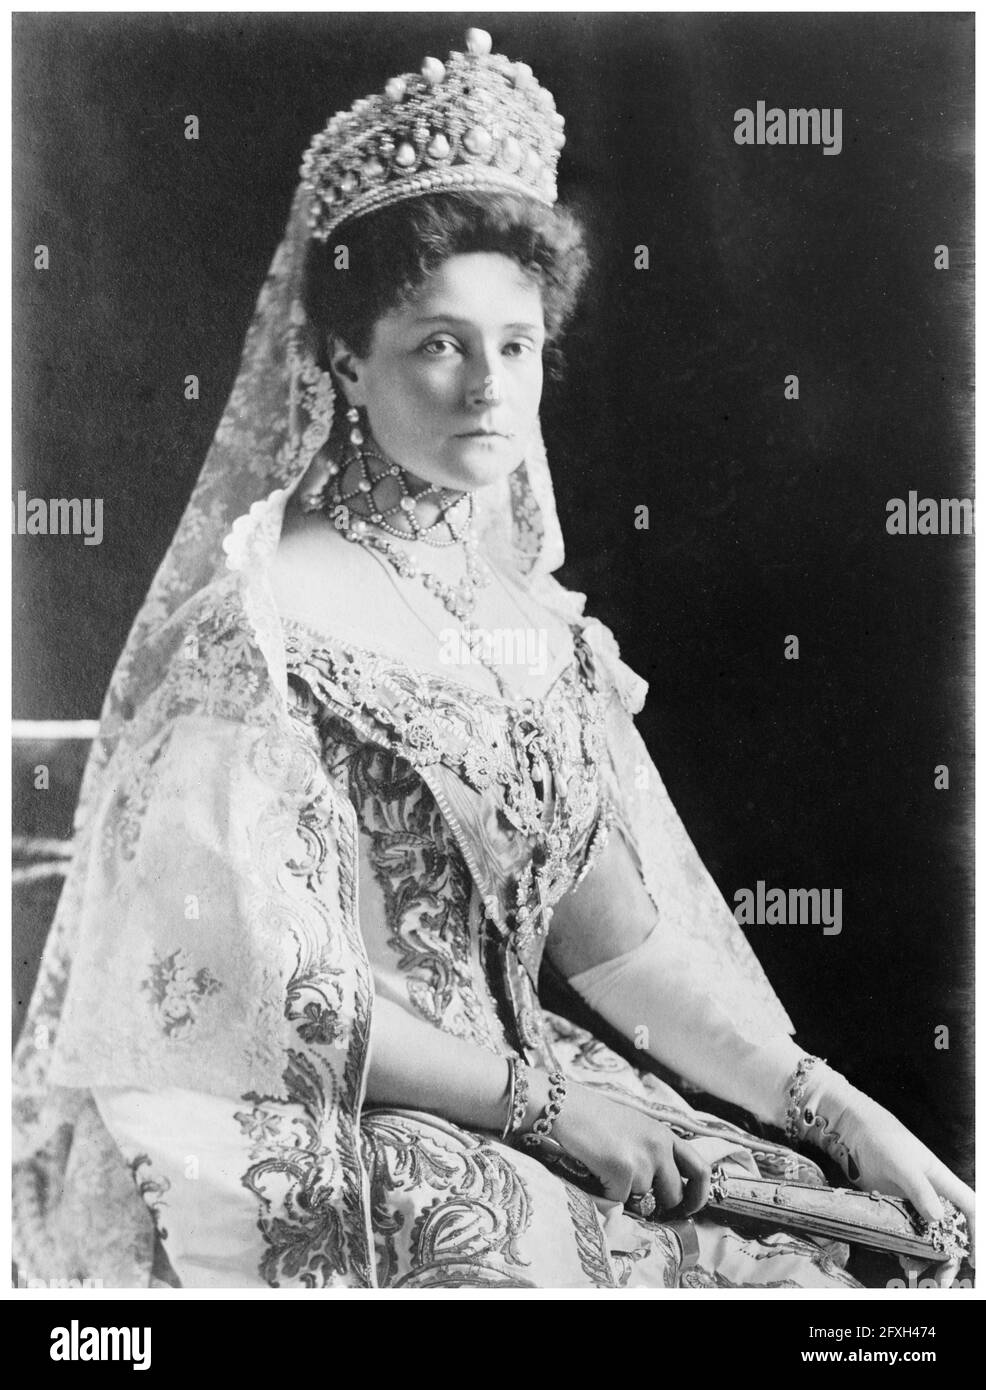 Alexandra Feodorovna (1872-1918), Empress Consort of Russia (1894-1917), wife of Nicholas II of Russia, portrait photograph by Frederick Boasson and Fritz Eggler, 1908 Stock Photo